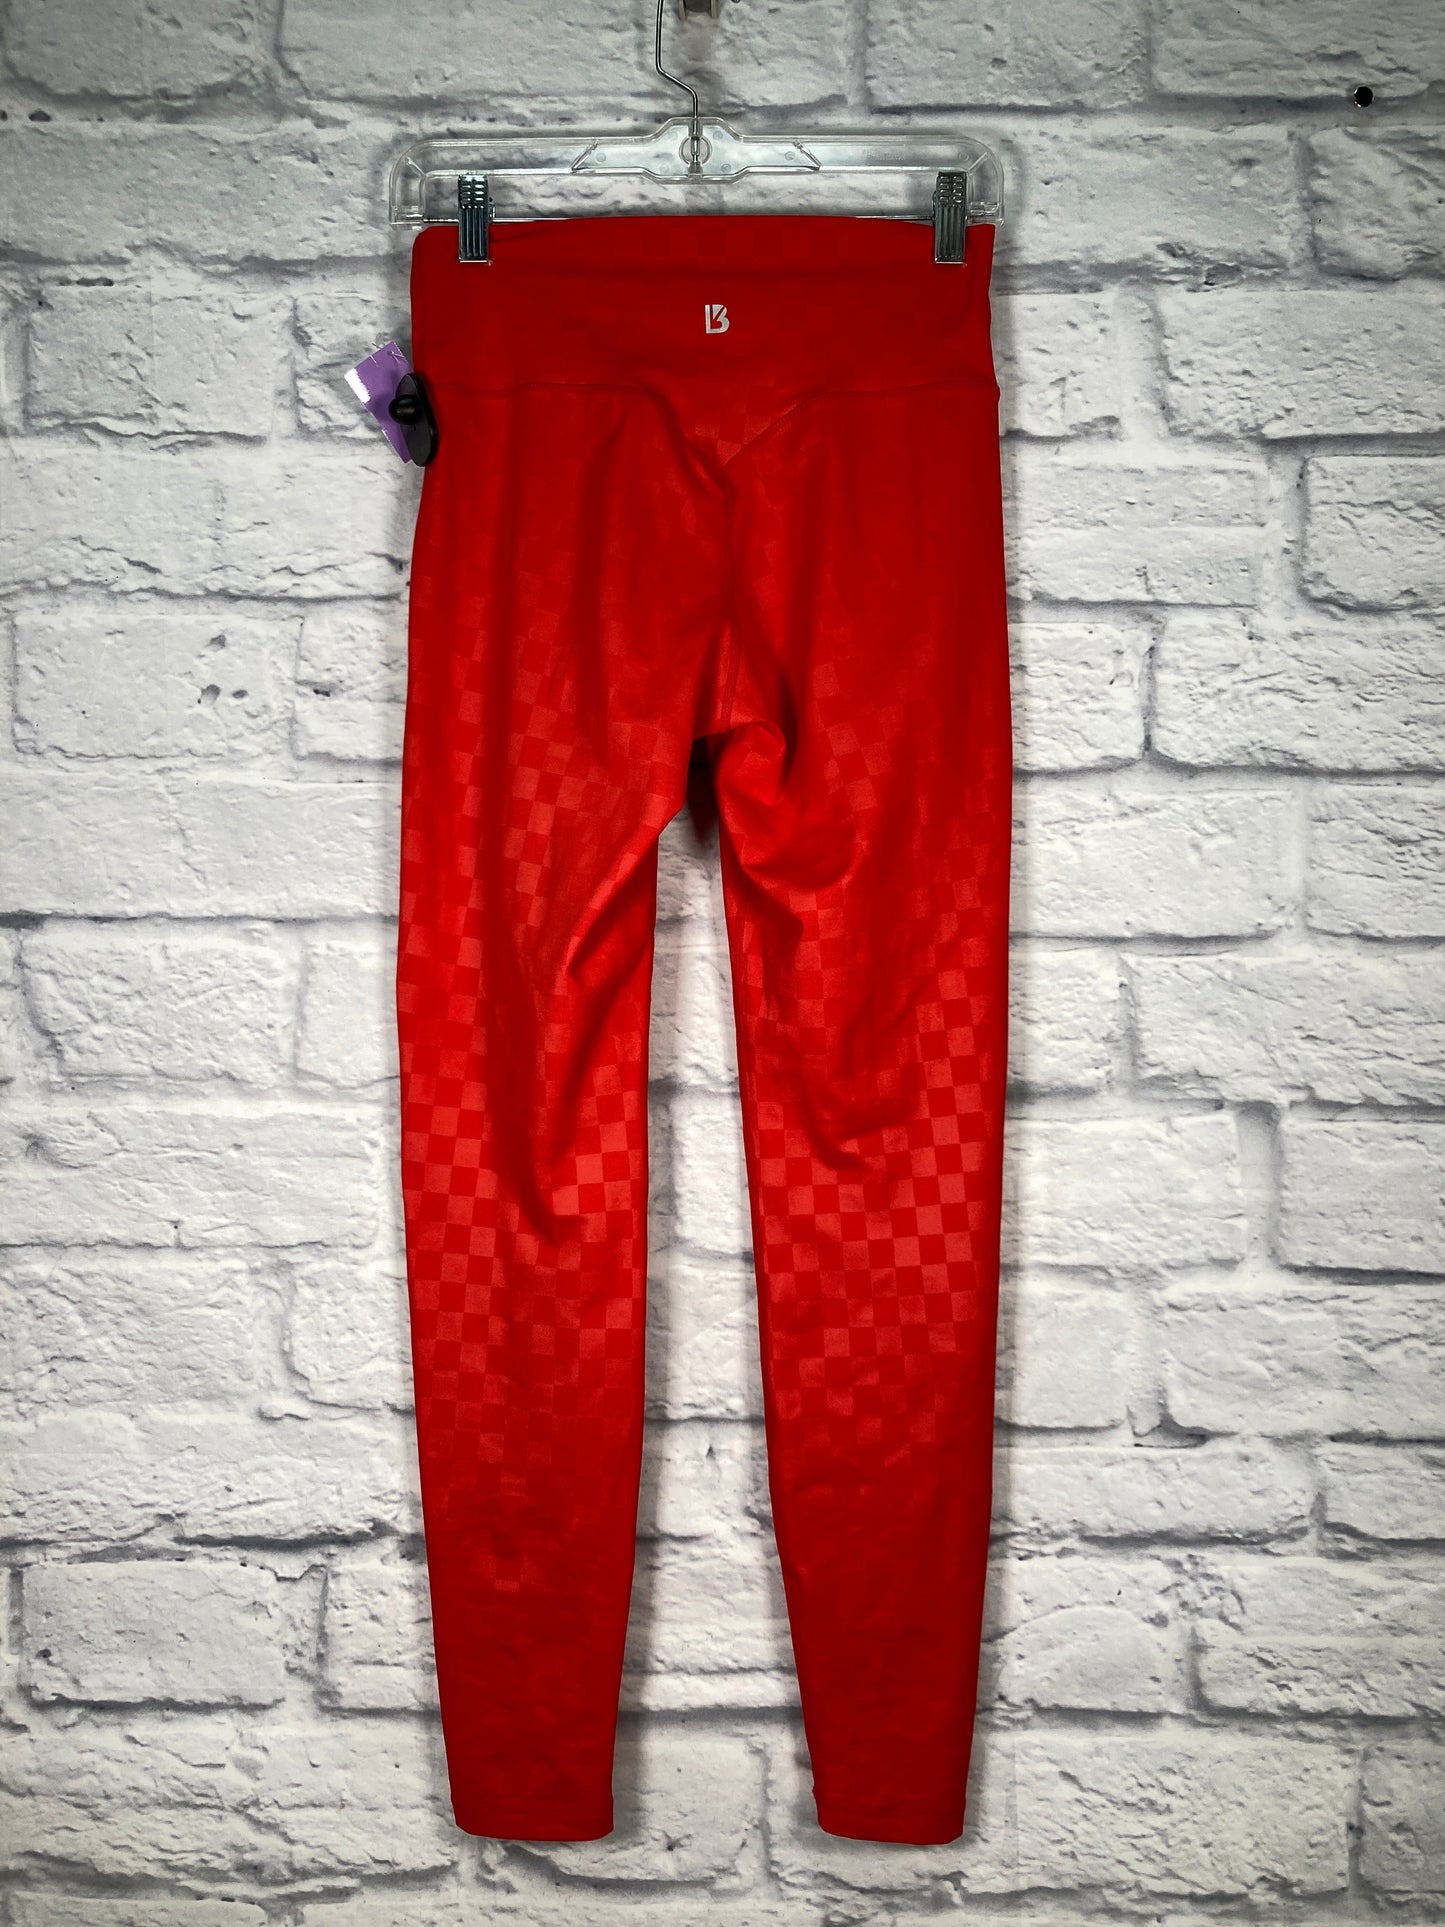 Red Athletic Leggings Clothes Mentor, Size M